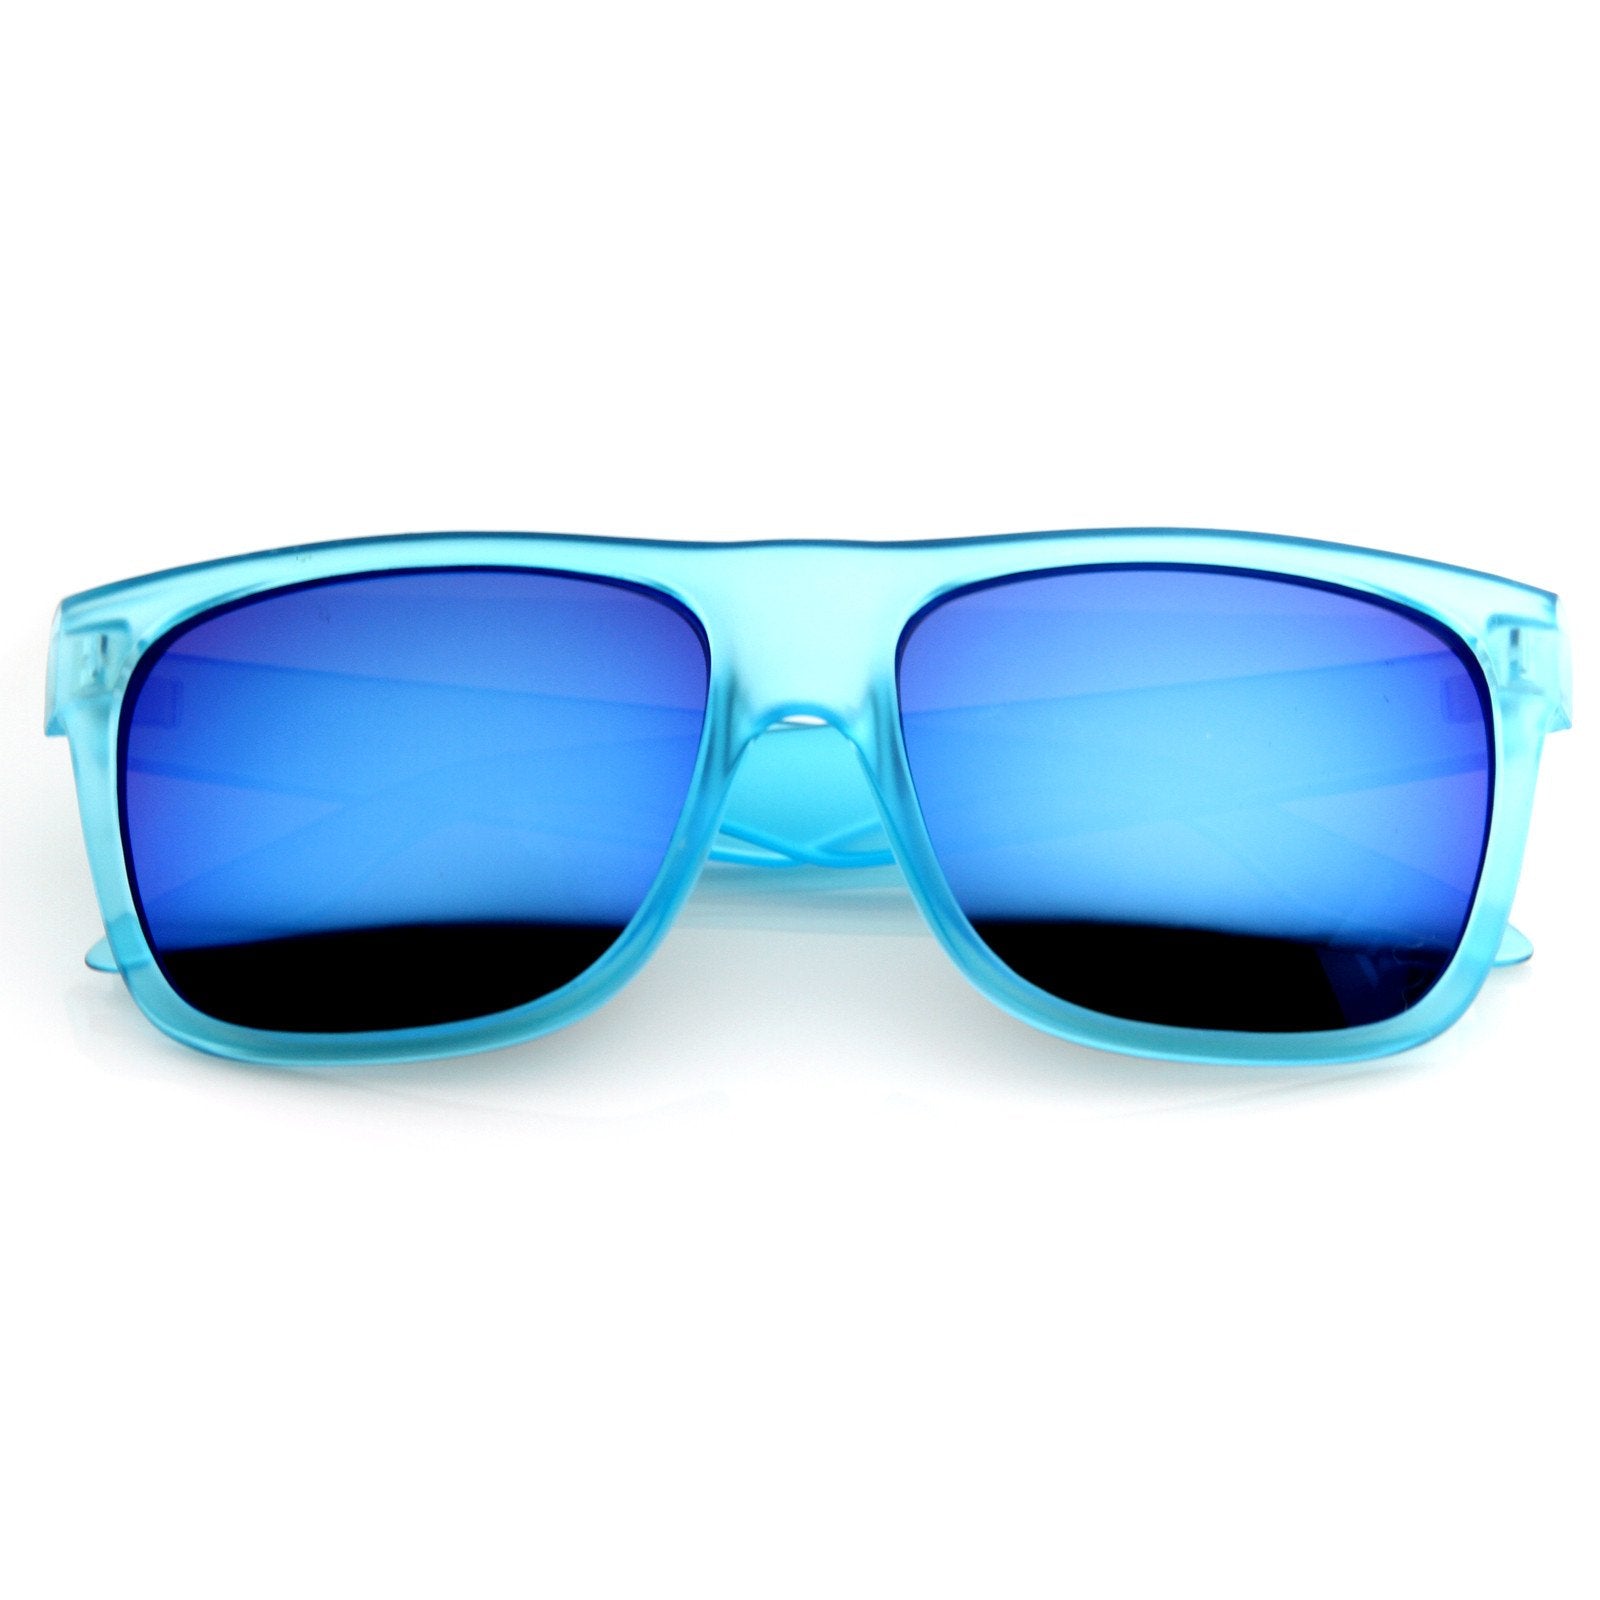 Frosted Retro Flat Top Candy Color Mirrored Lens Sunglasses 8610 - zeroUV